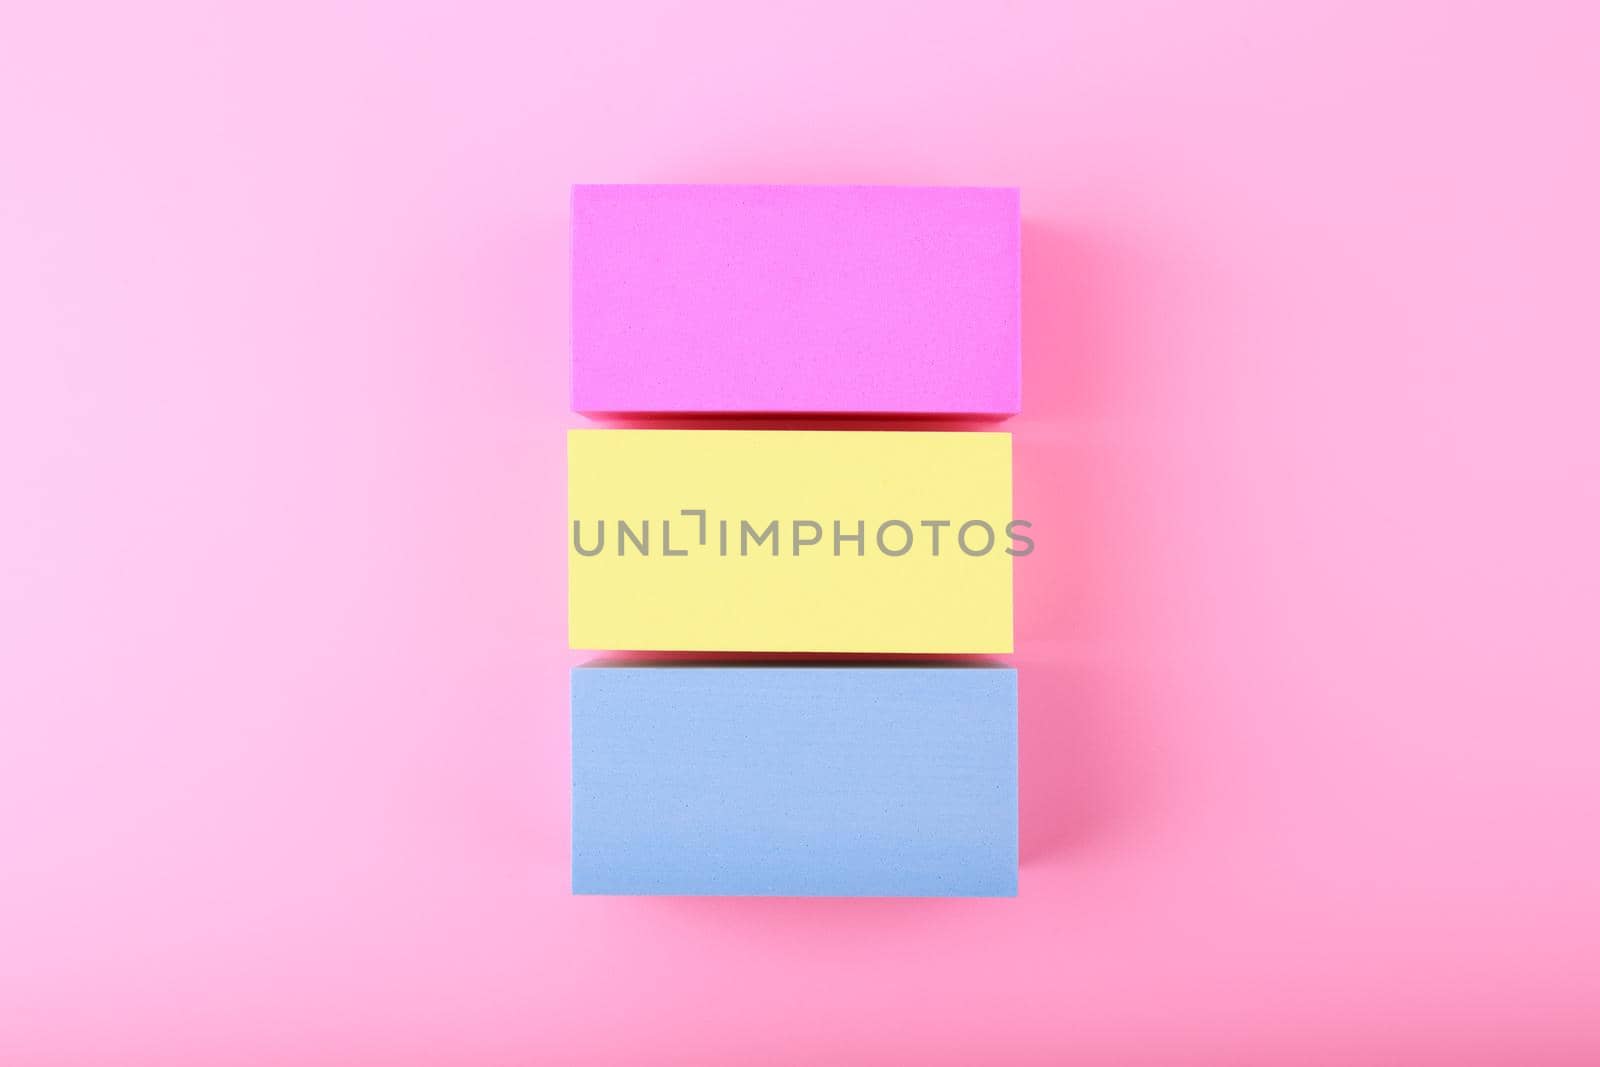 Pansexual pride flag on pink background. Symbol of pansexual community in minimalistic style by Senorina_Irina